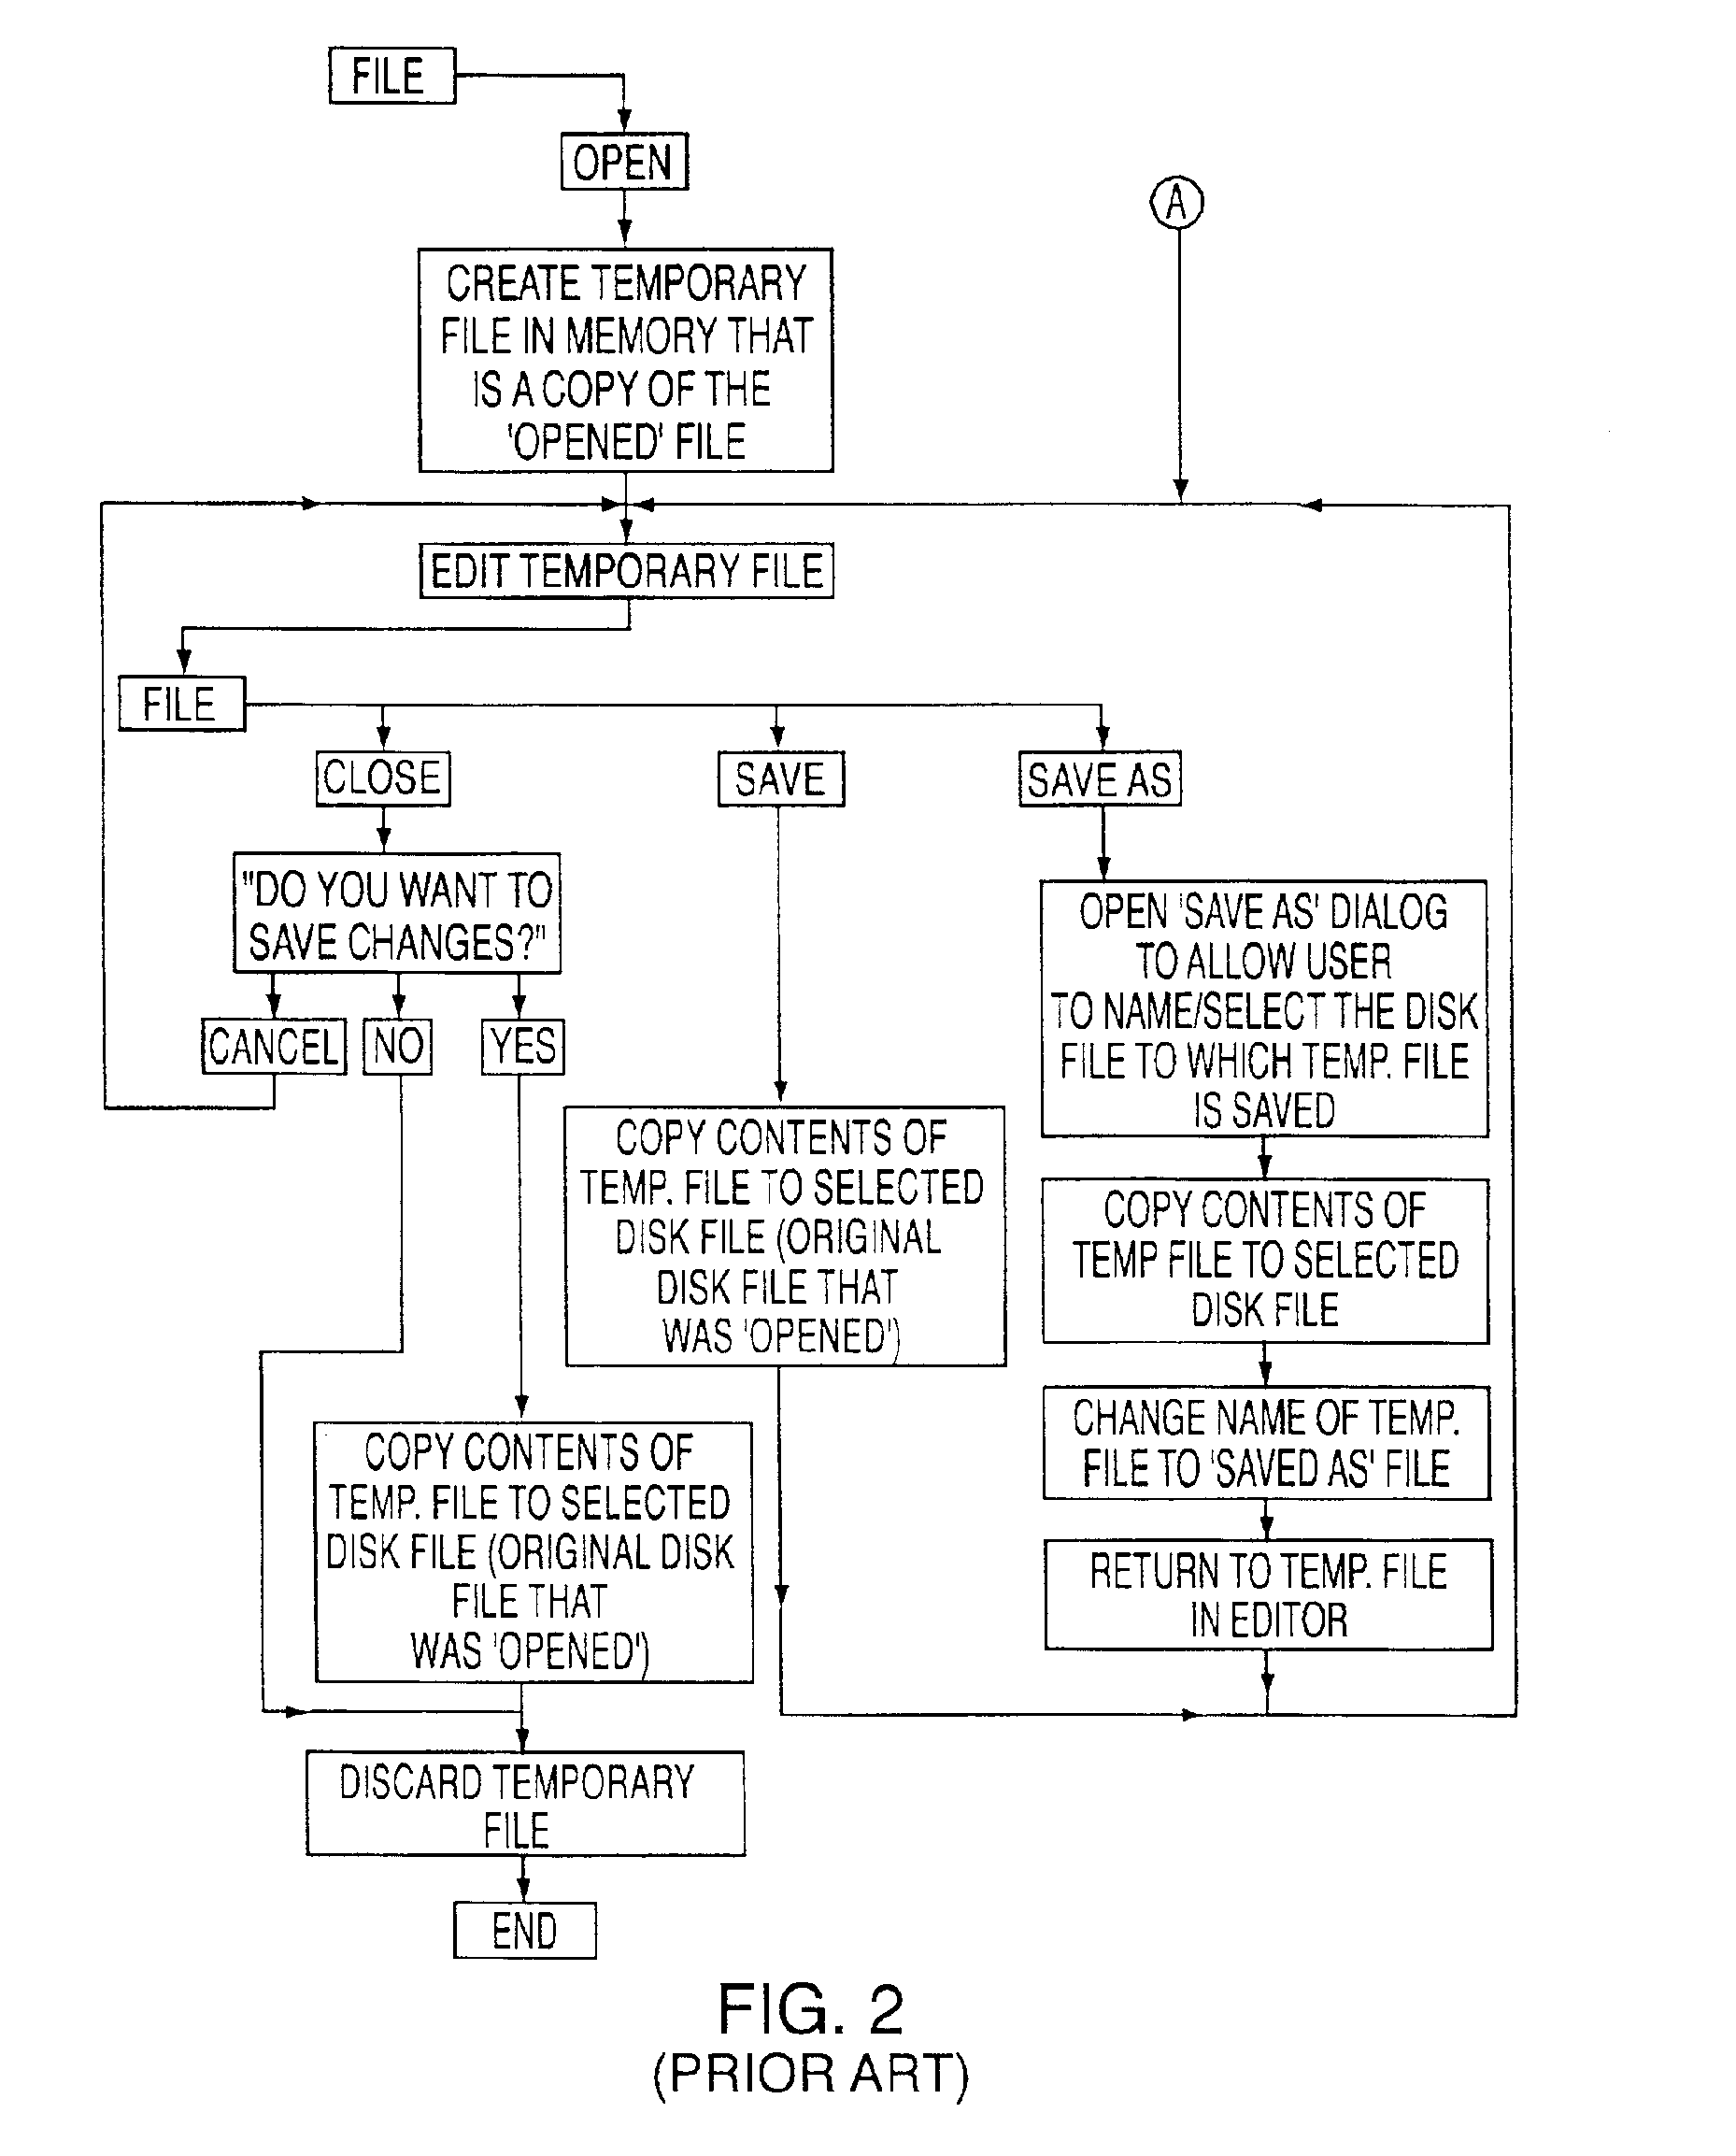 Electronics assembly engineering system employing naming and manipulation functions for user defined data structures in a data system using transaction service